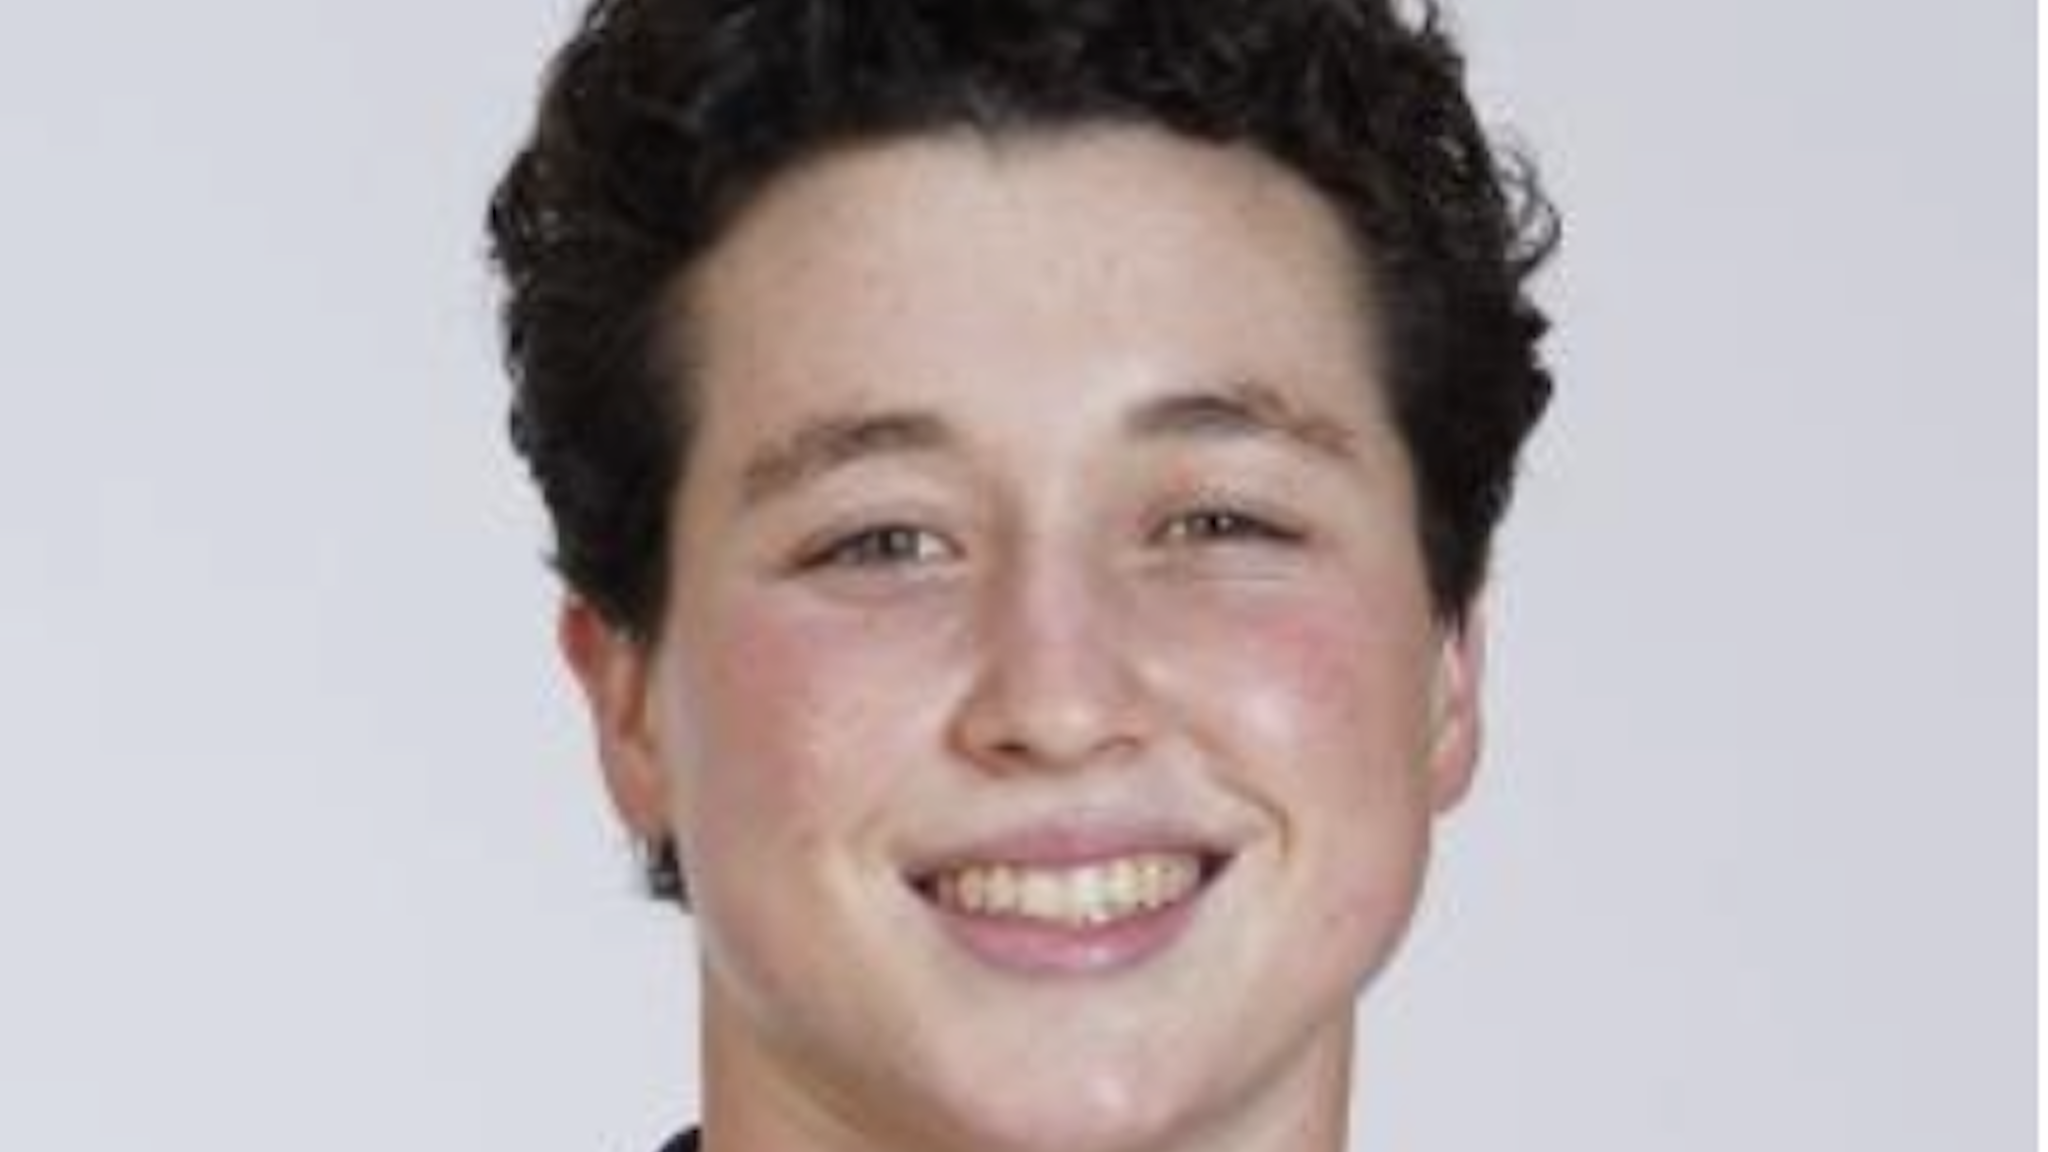 Iszac Henig, a senior on the Yale men’s swim team, an Ivy League All-American swimmer, has gone from pool shark to scrub after transitioning from female to male, the opposite of the switch made by Lia Thomas.